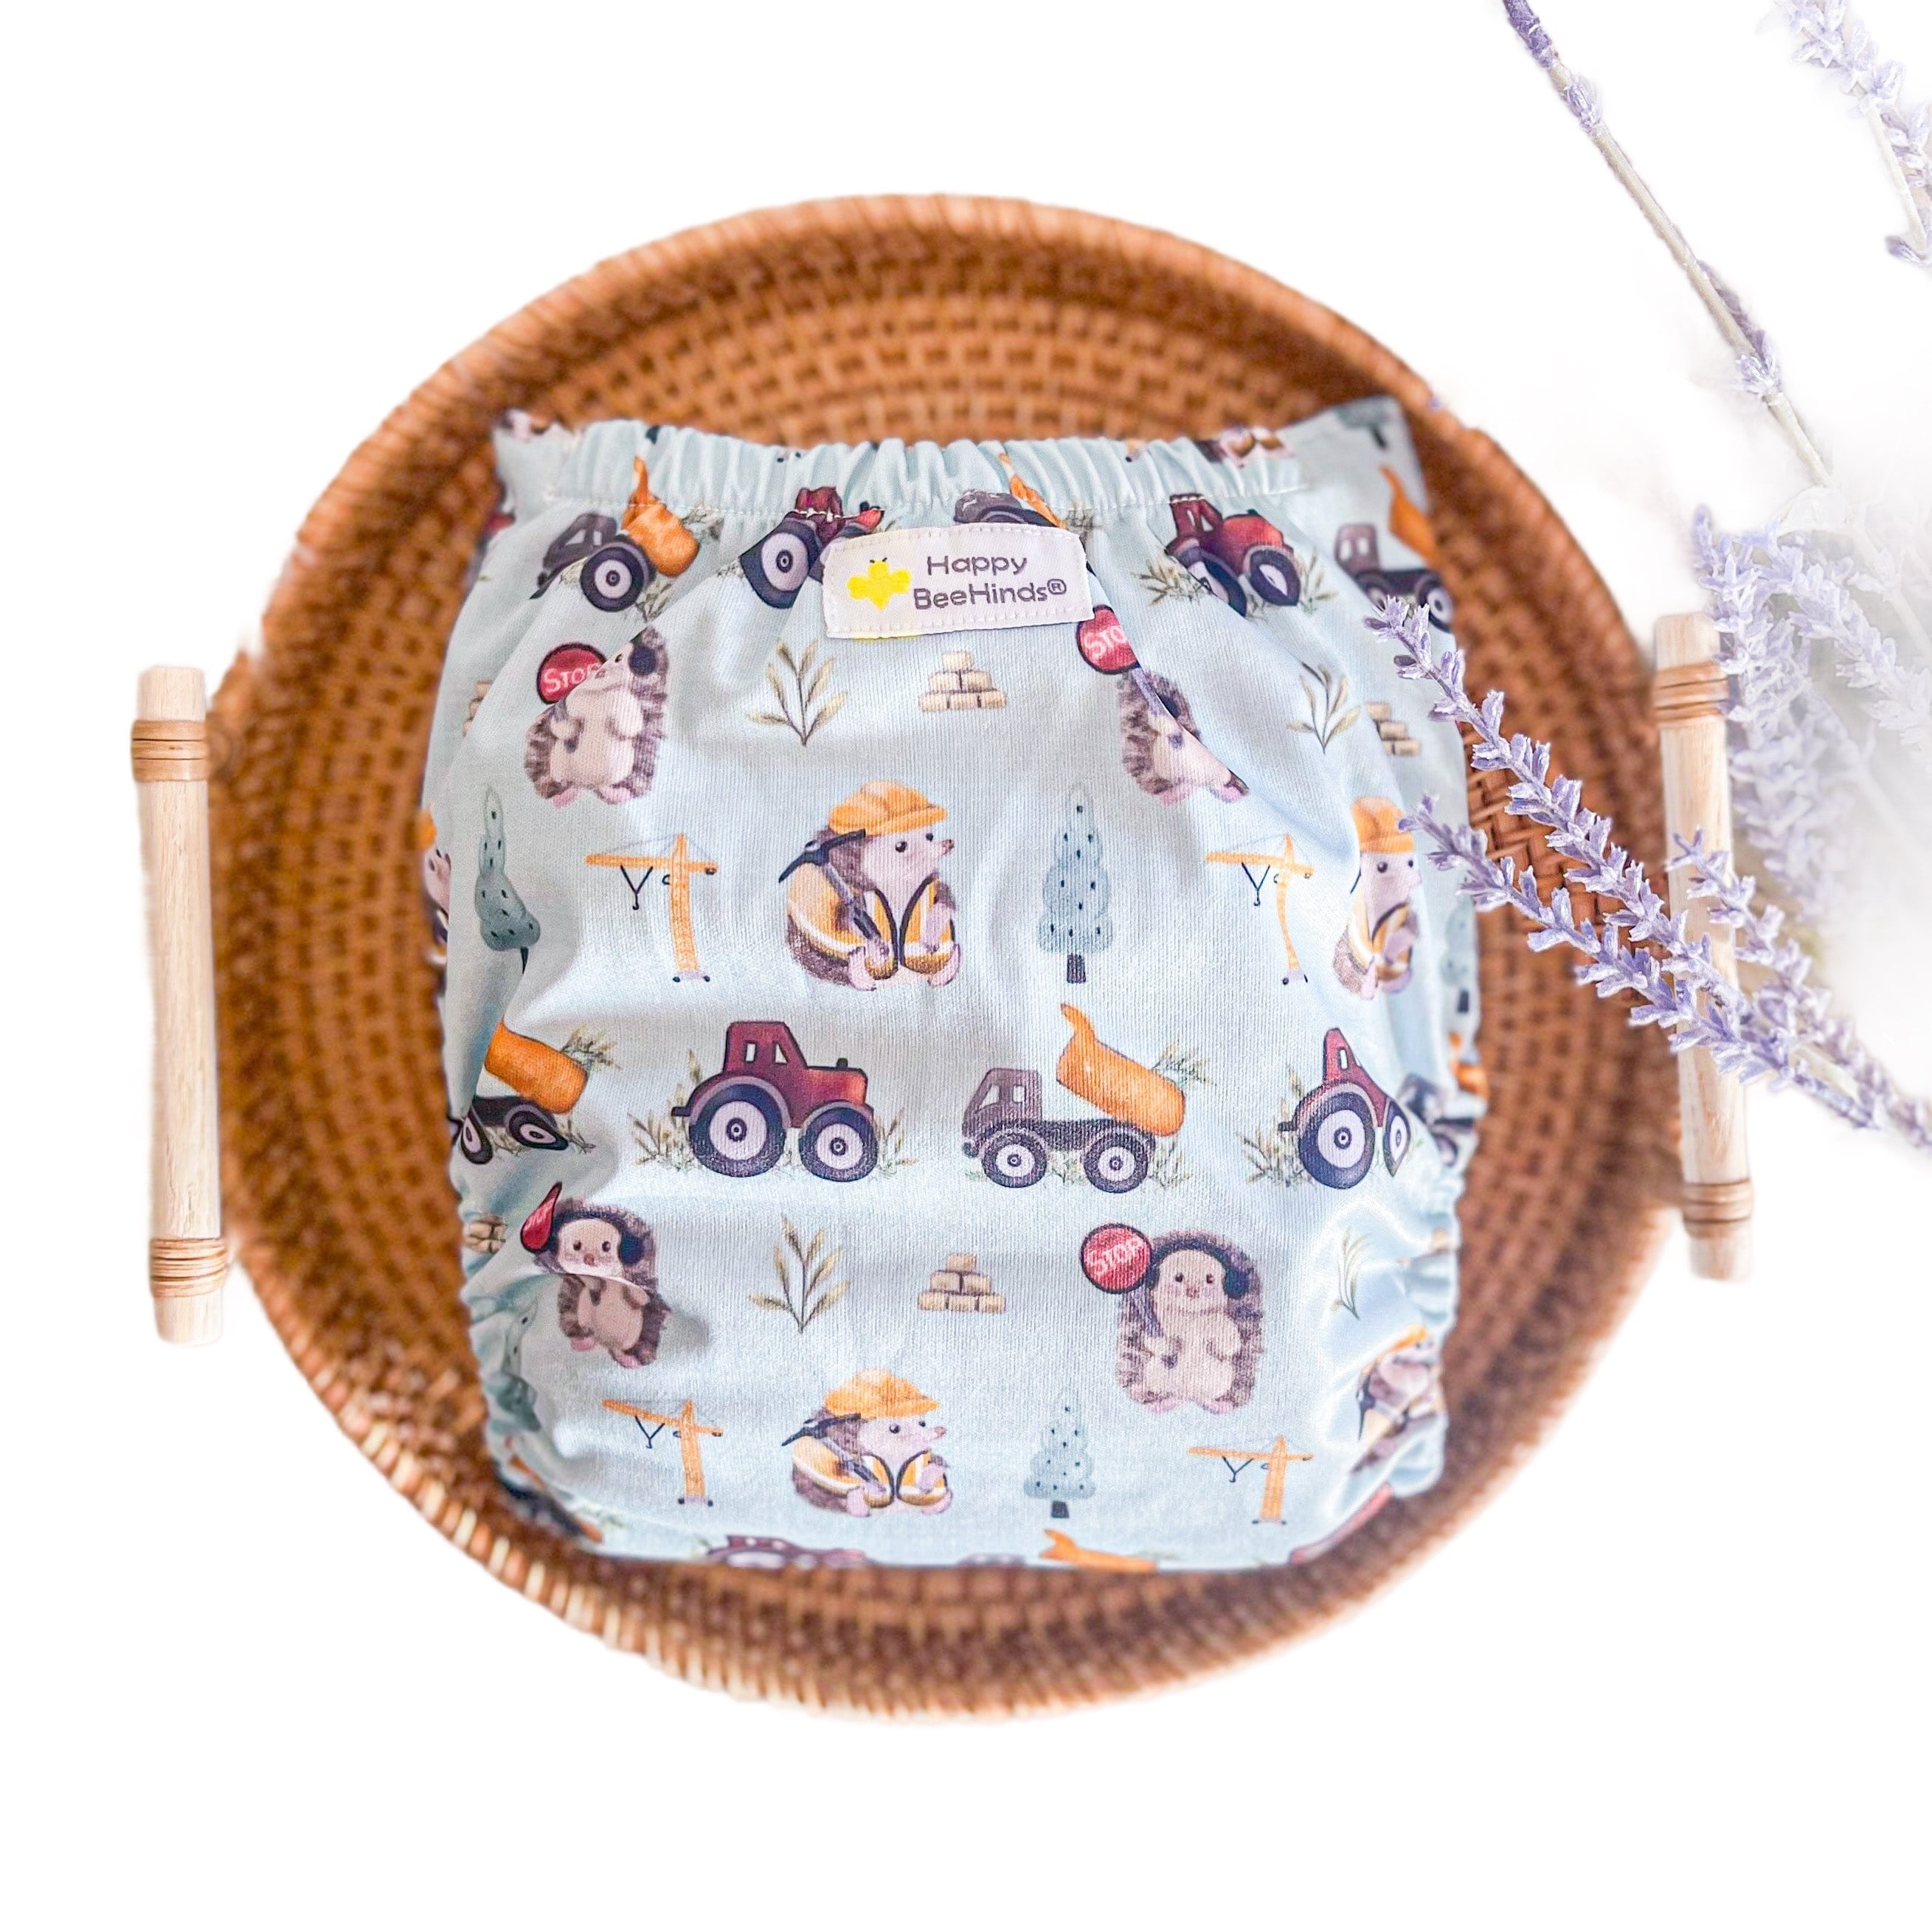 The "ez" Pocket Diaper By Happy Beehinds - Creative Collection